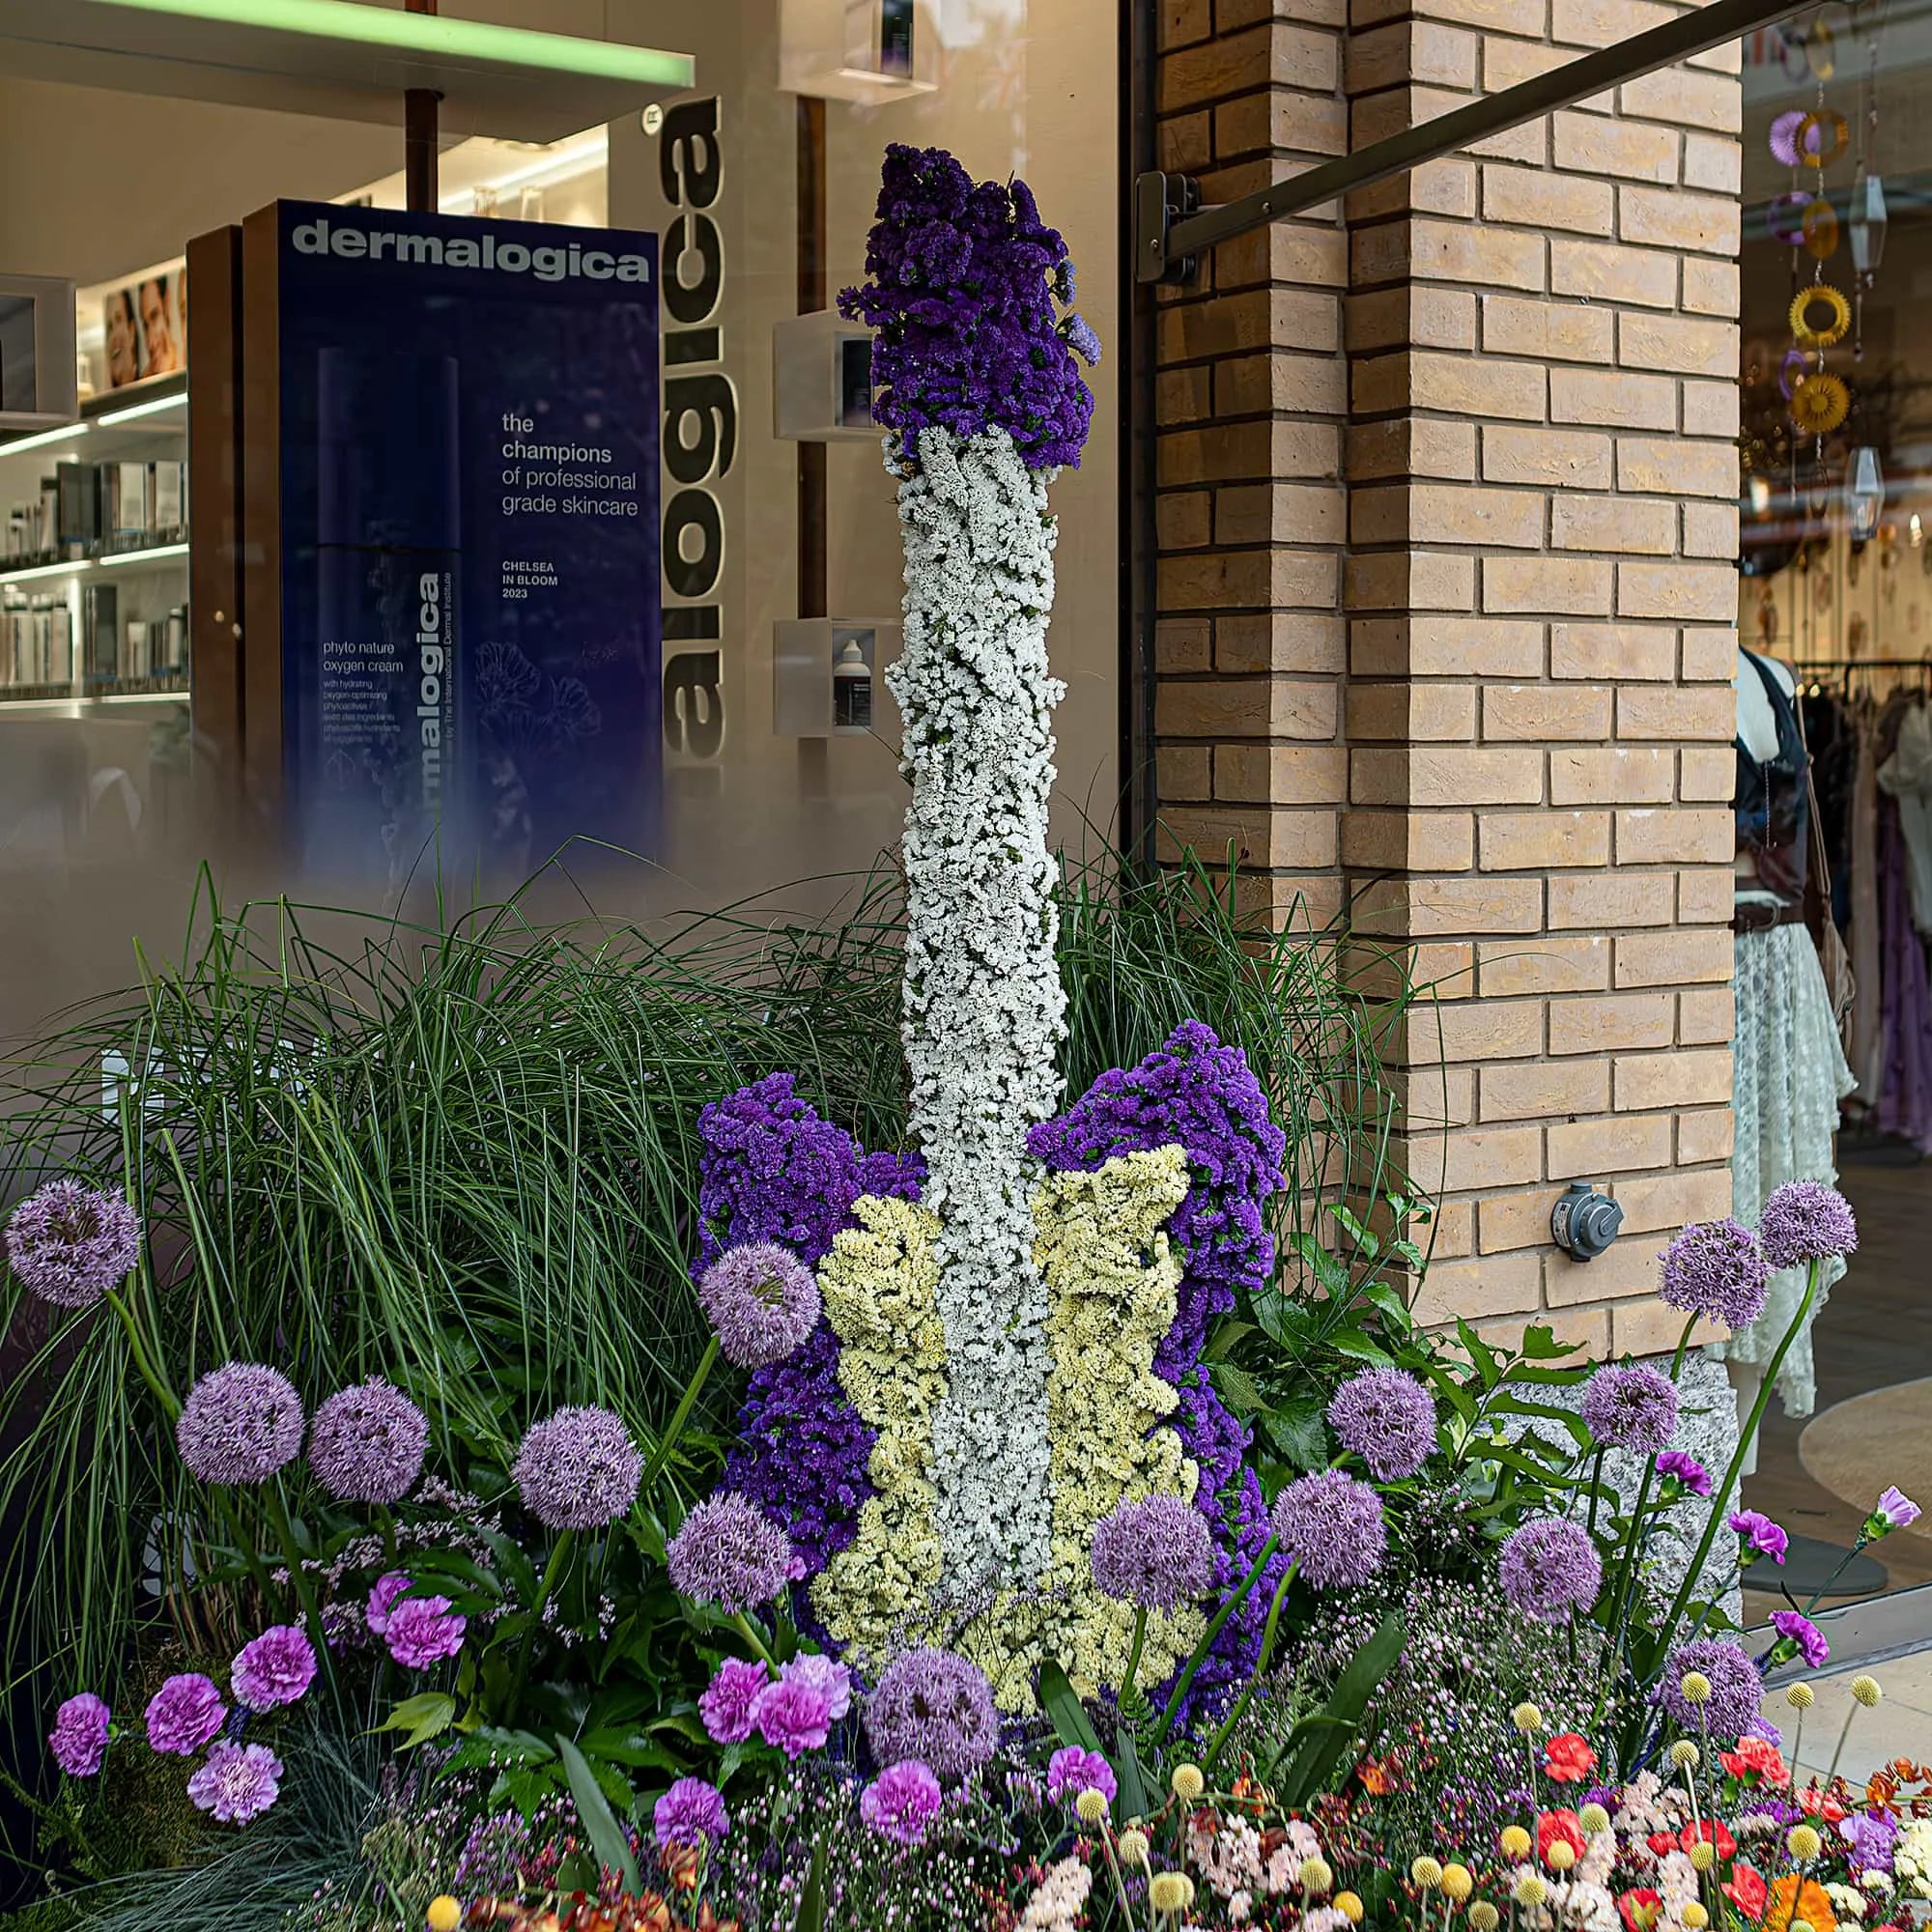 Sustainable forever flowers crafted in the shape of a guitar due to the installation being inspired by Bohemian Rapsody